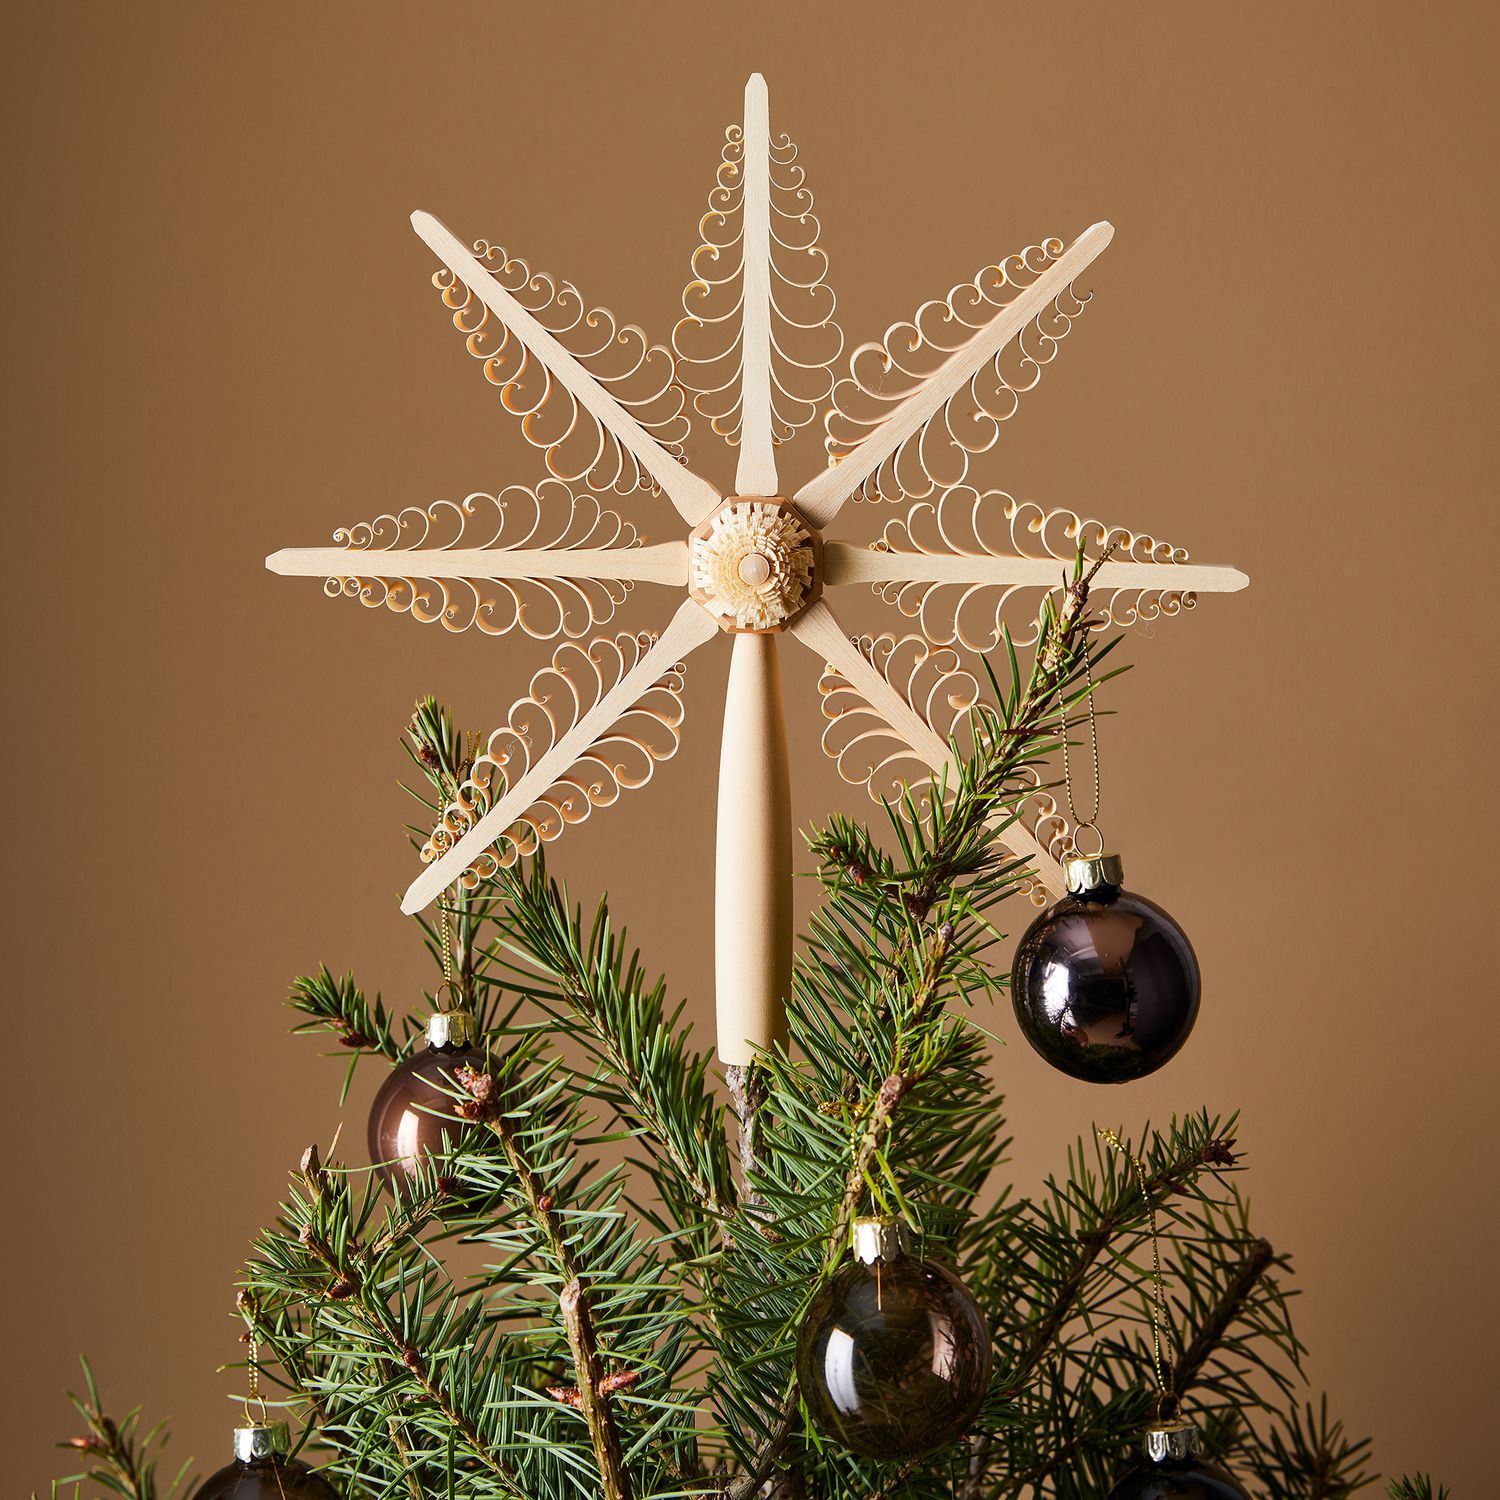 Mueller Handcrafted German Tree Topper in Beechwood for Holiday Decorating | Food52